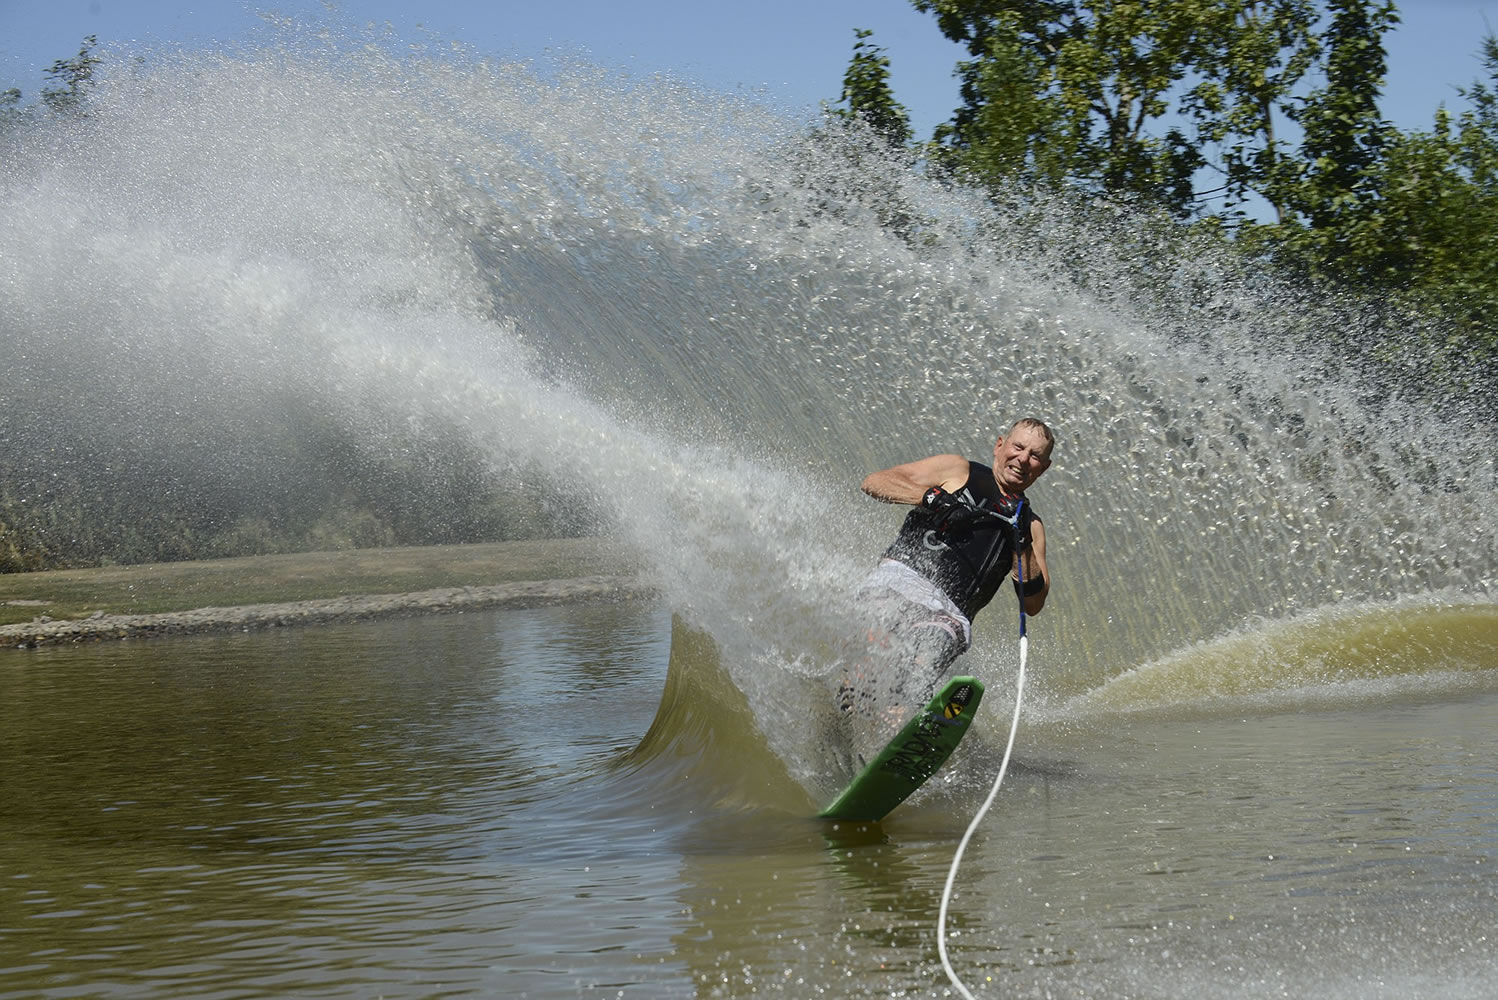 Scott Thompson and his daughter Erika Bolliger slalom water ski together on Mint Lake in Yacolt.